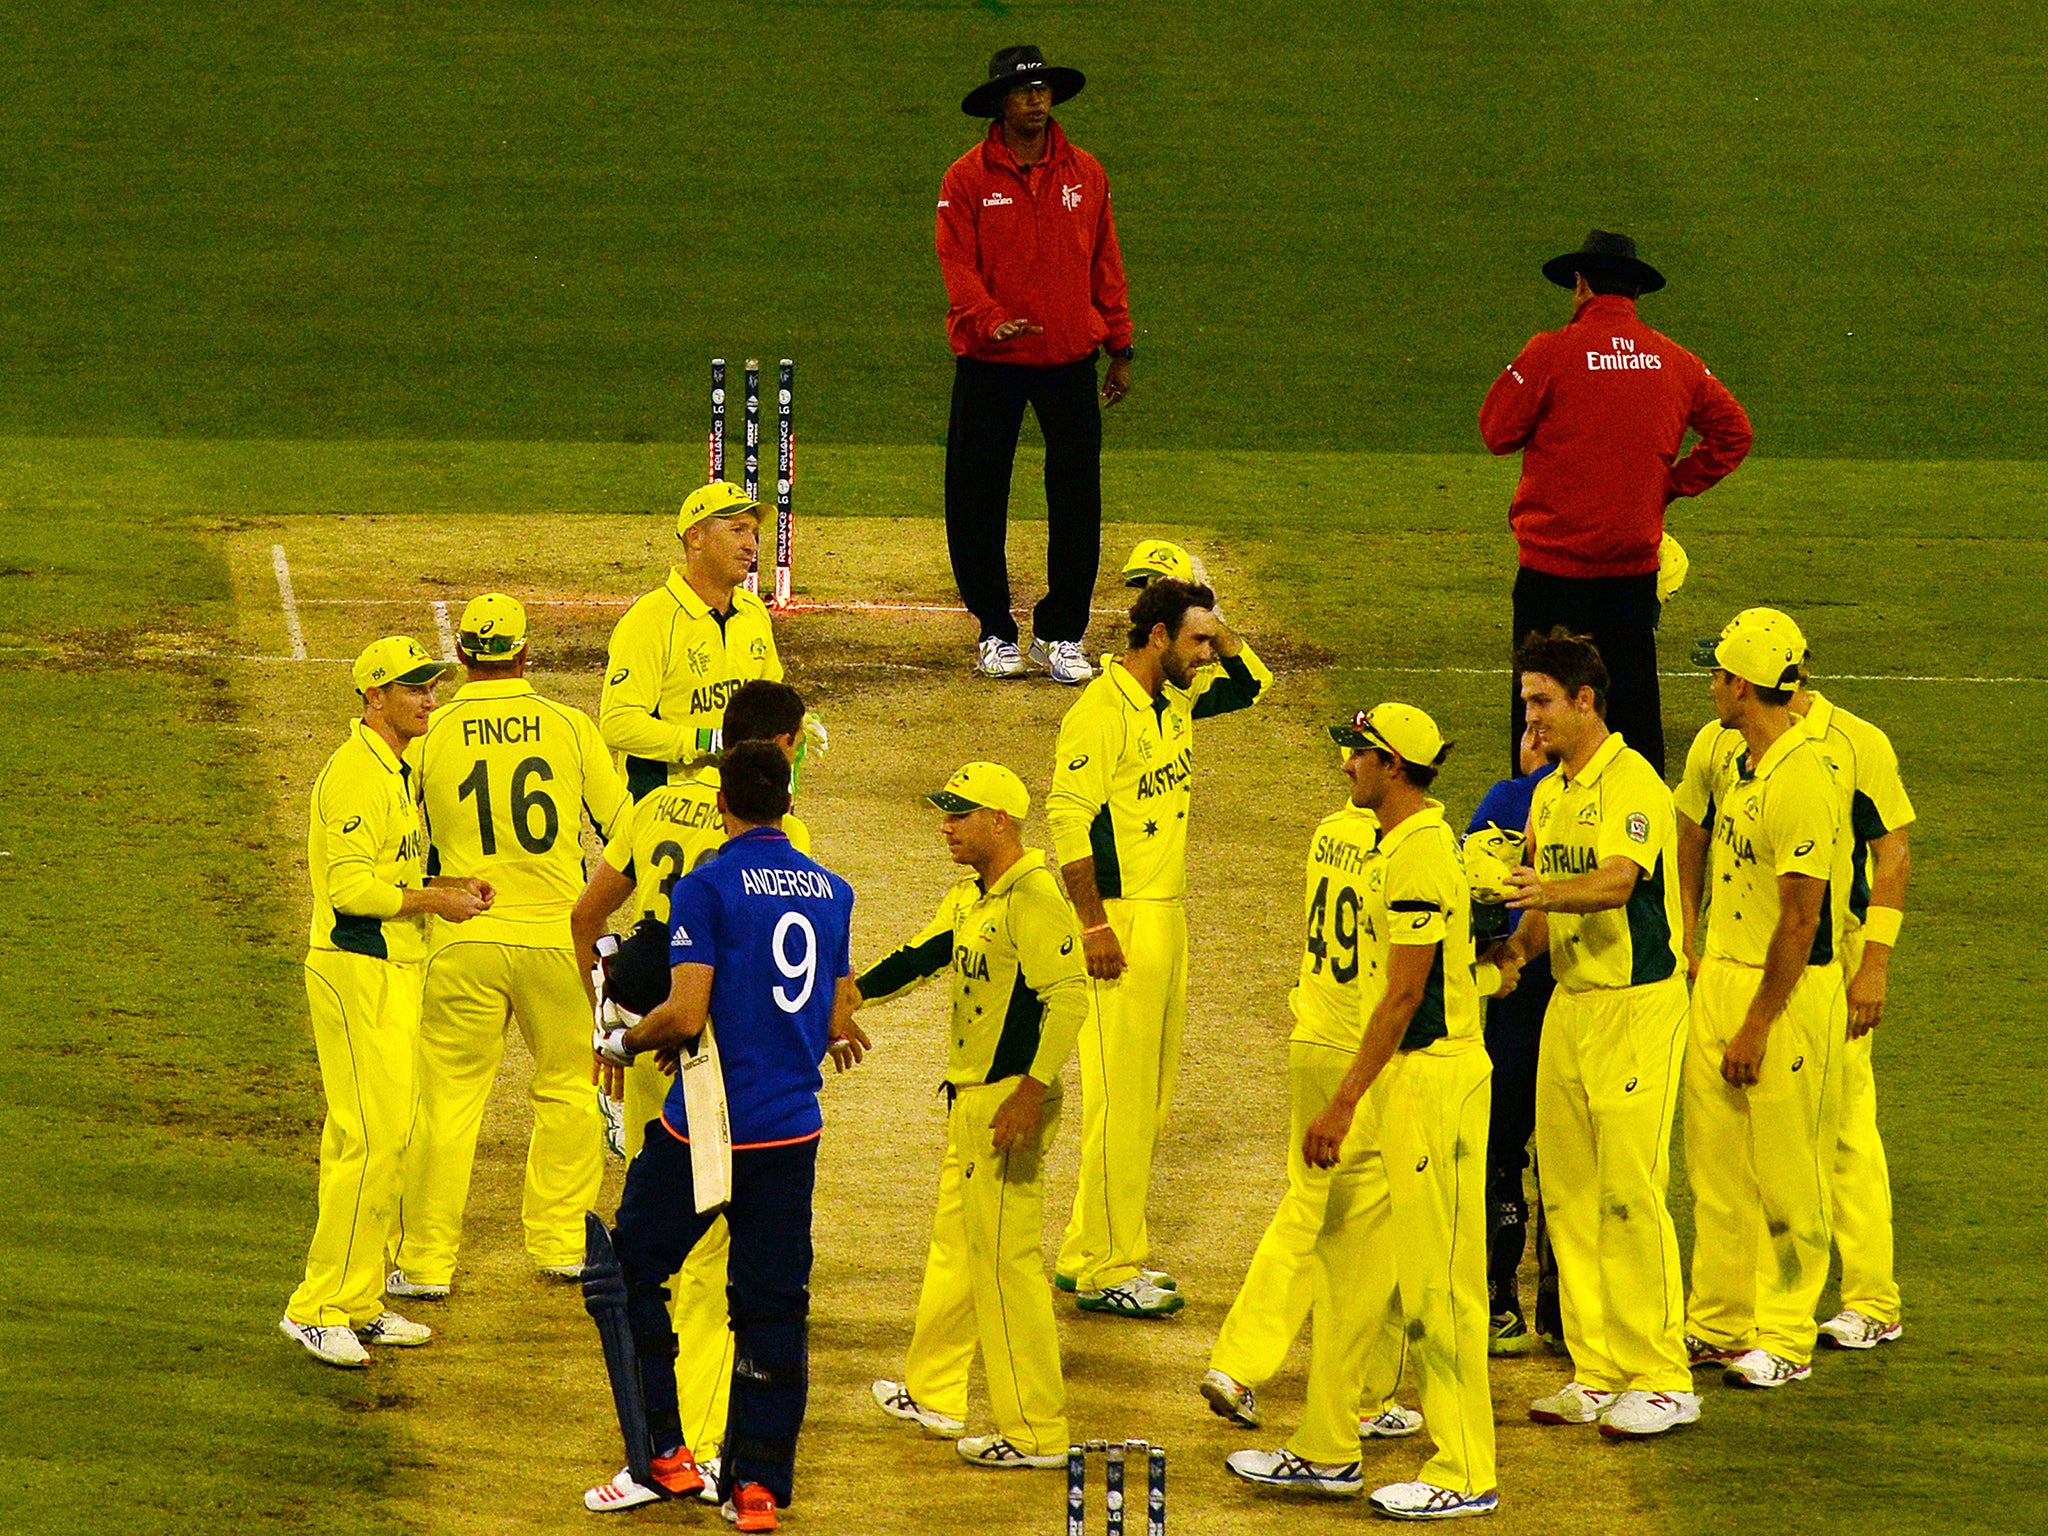 Australian players celebrate their victory during the Pool A 2015 Cricket World Cup match between Australia and England at the Melbourne Cricket Ground